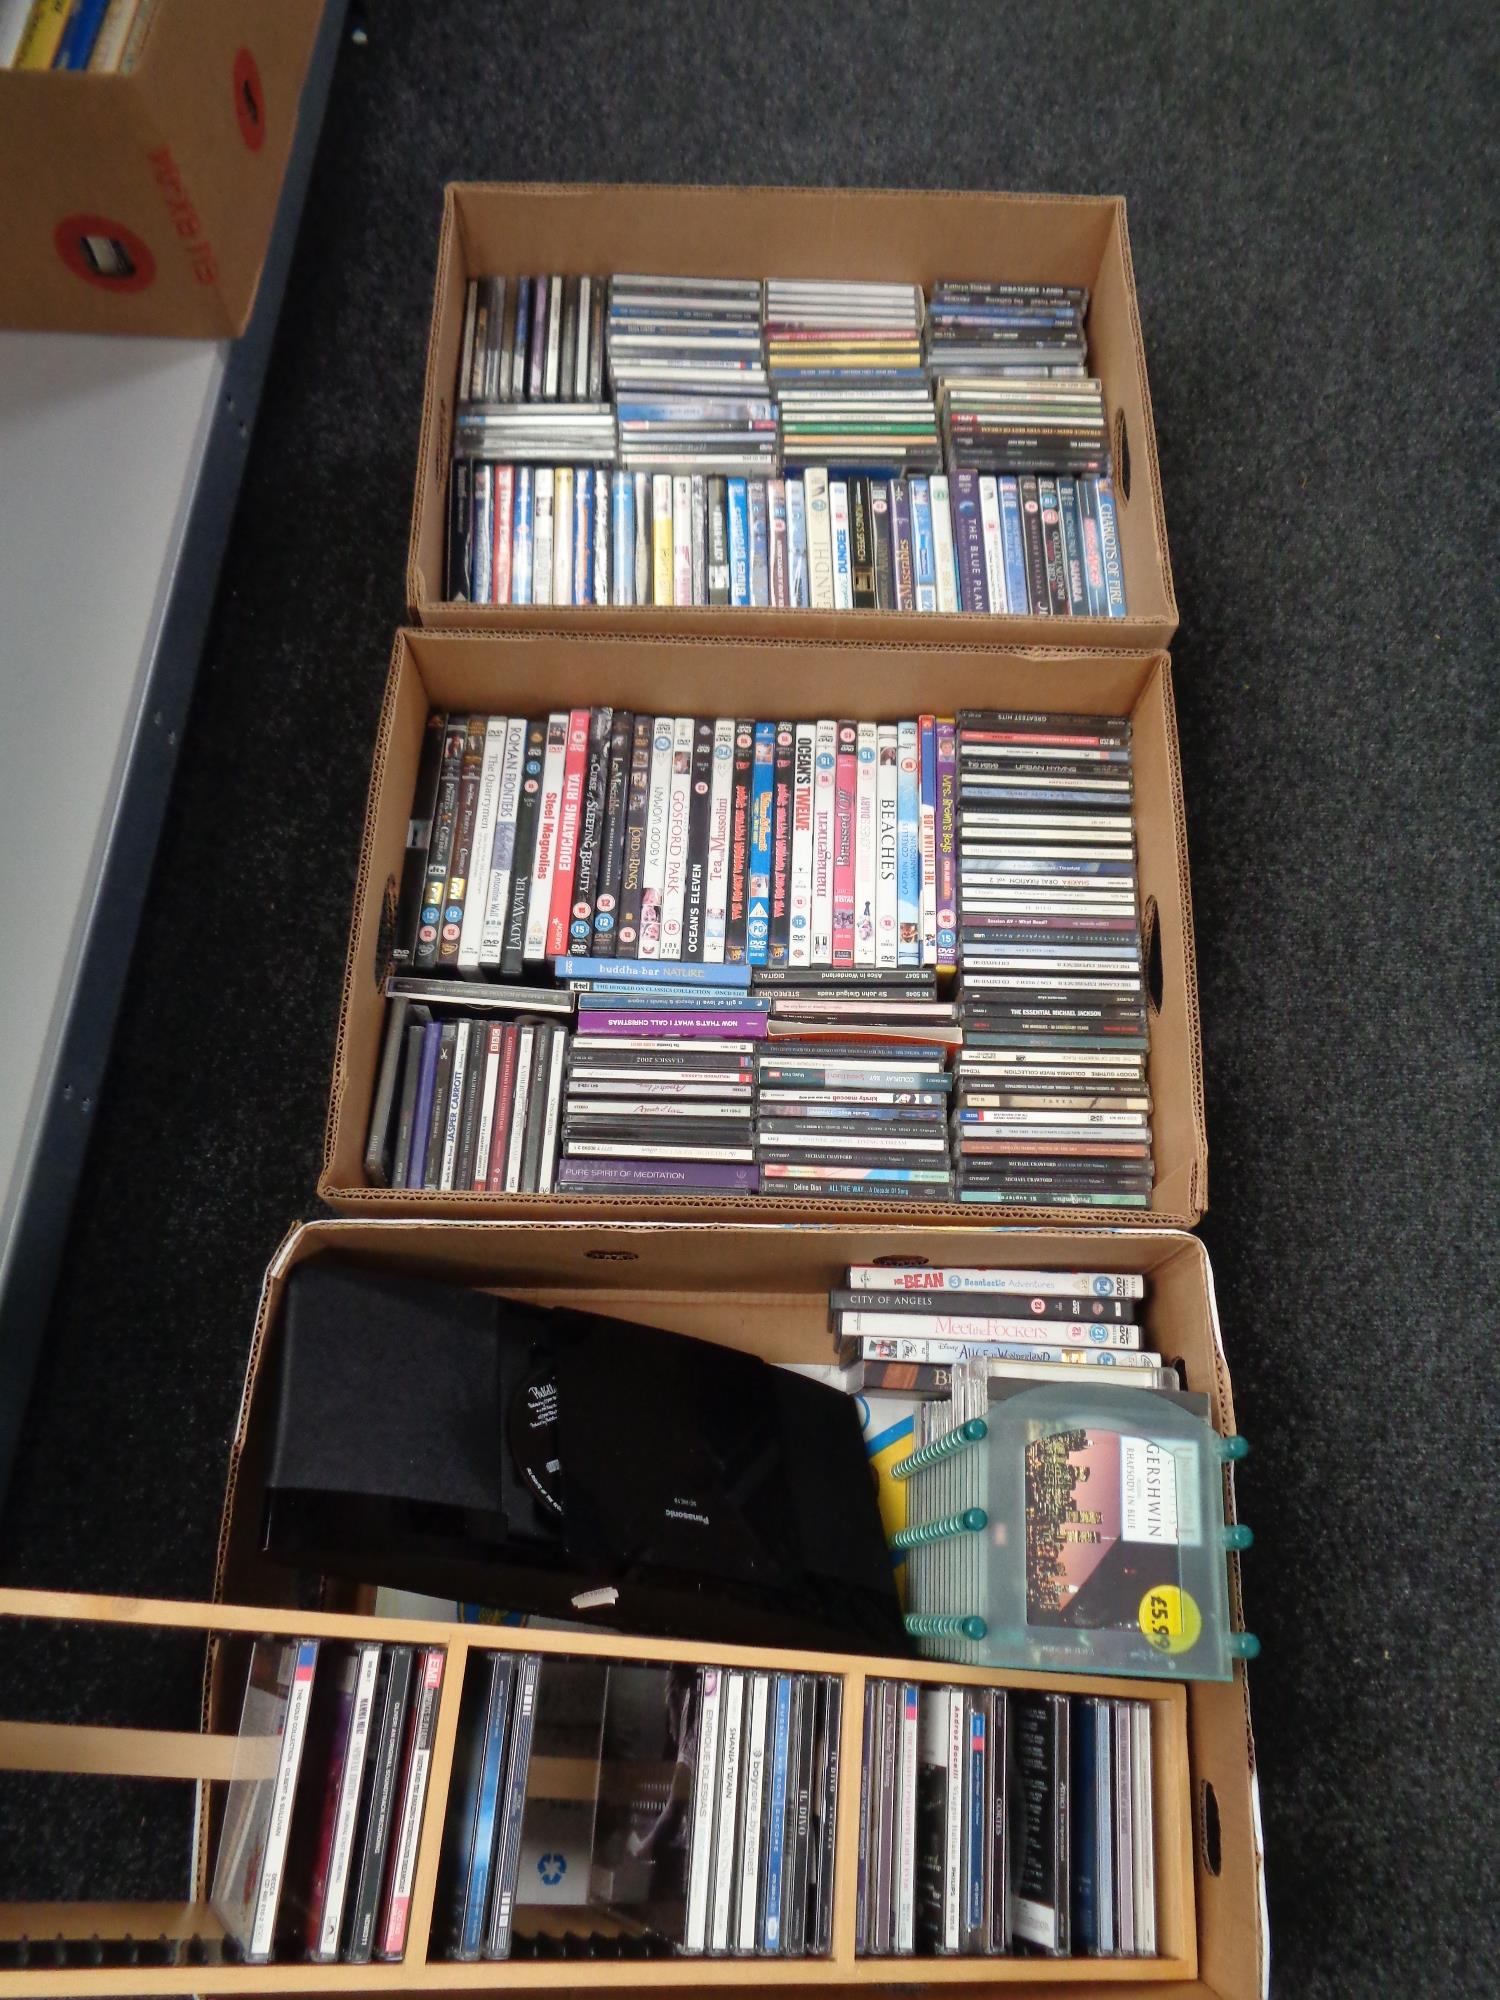 Three boxes of dvds and cds together with a Panasonic music centre